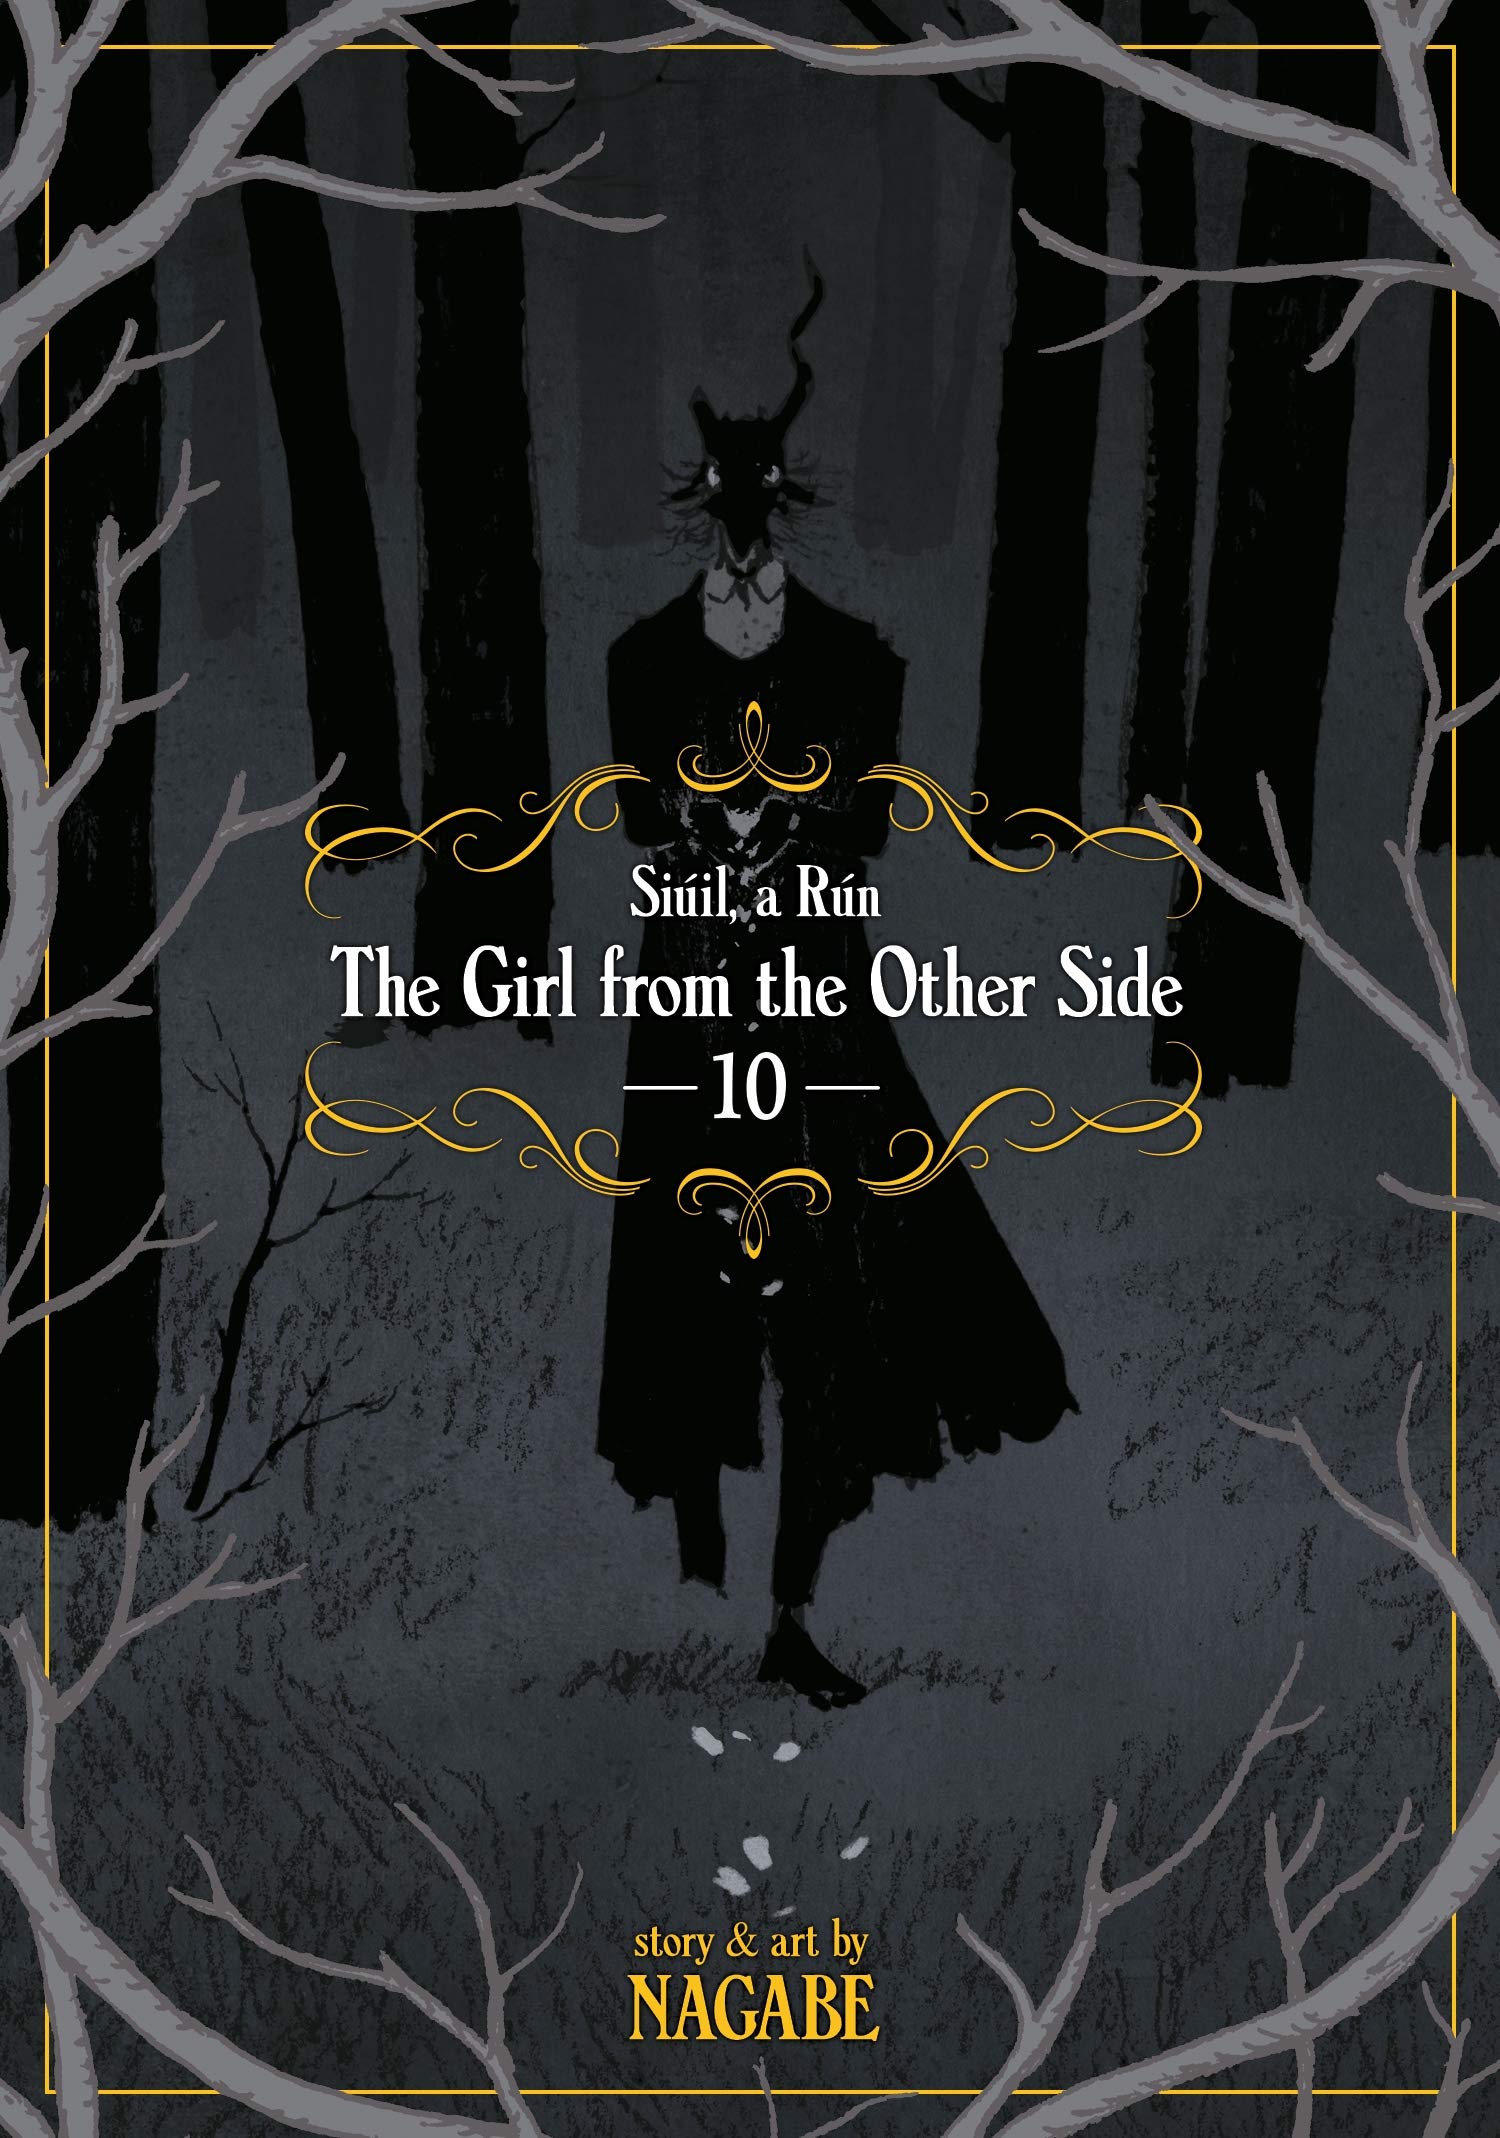 The Girl from the Other Side: Siuil, a Run Volume 10 | Nagabe